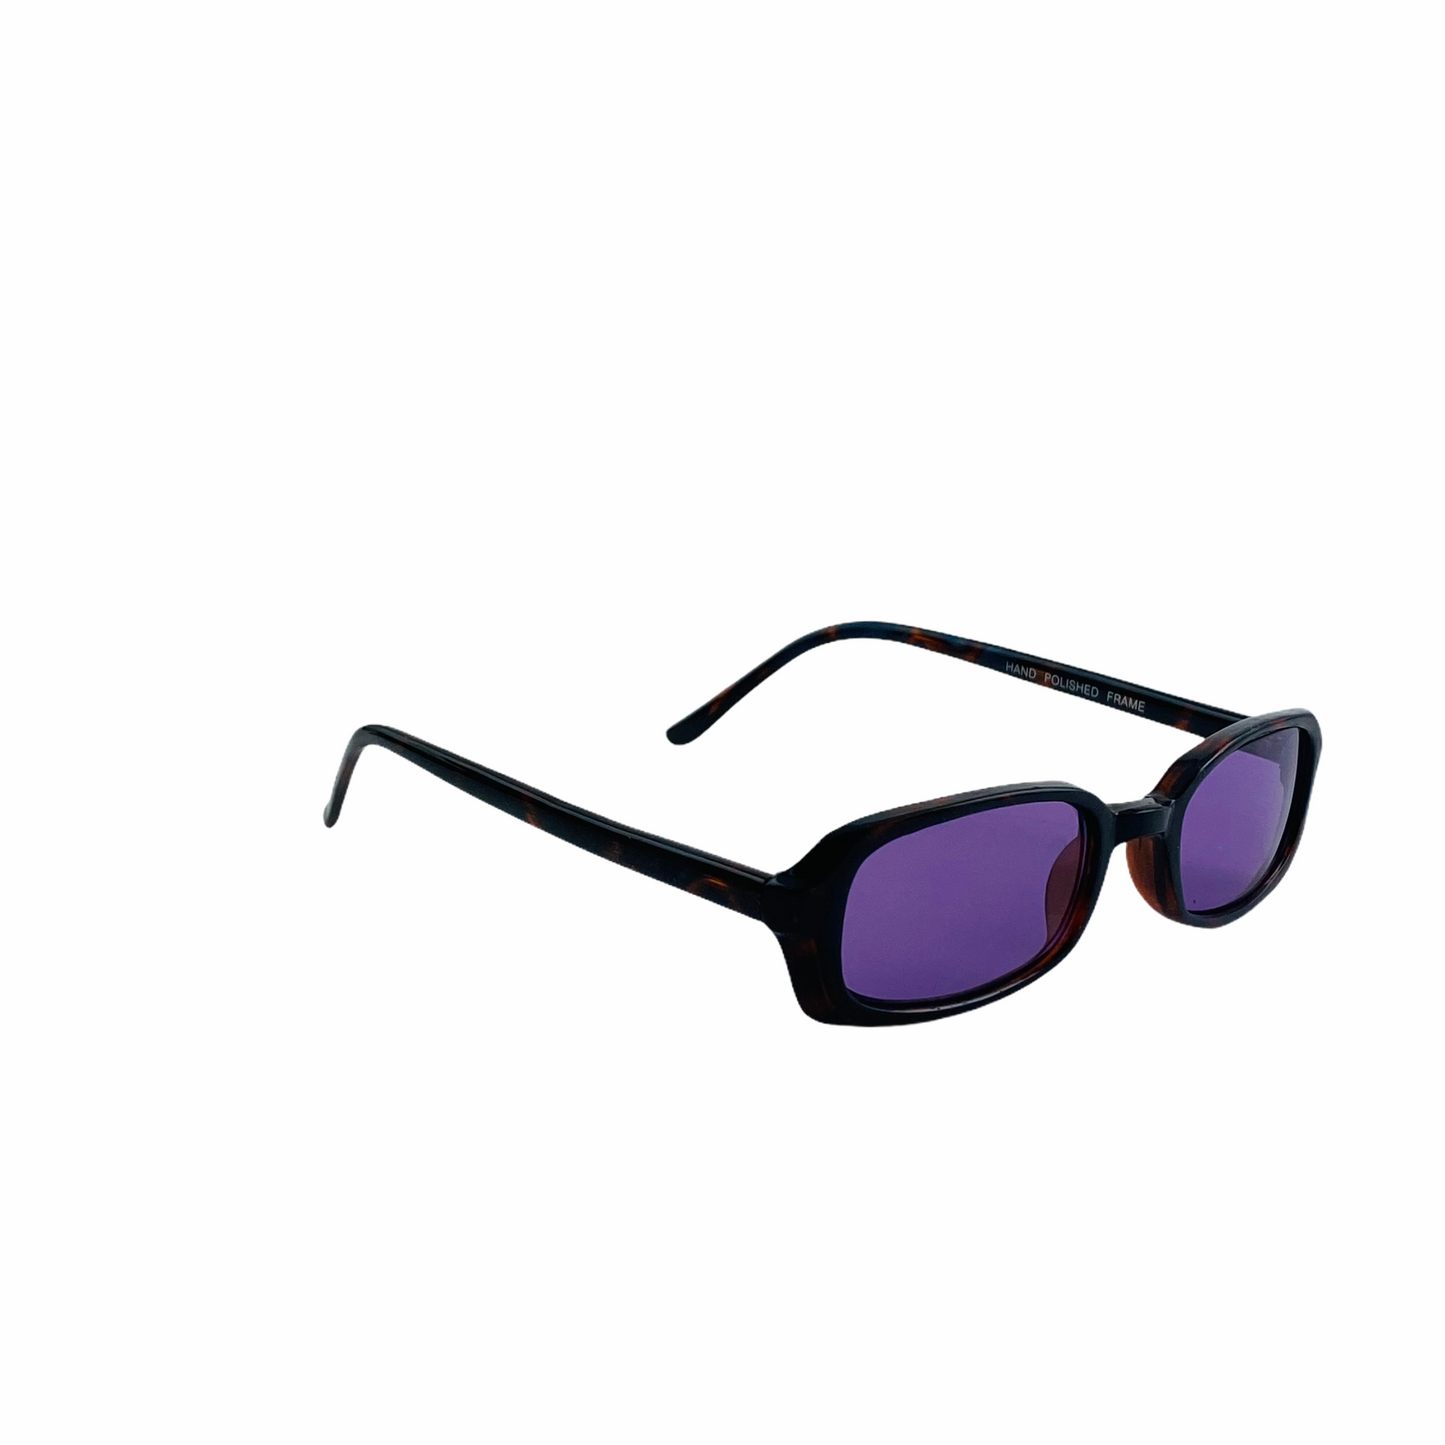 authentic deadstock purple rectangular shape sunnies with glass 